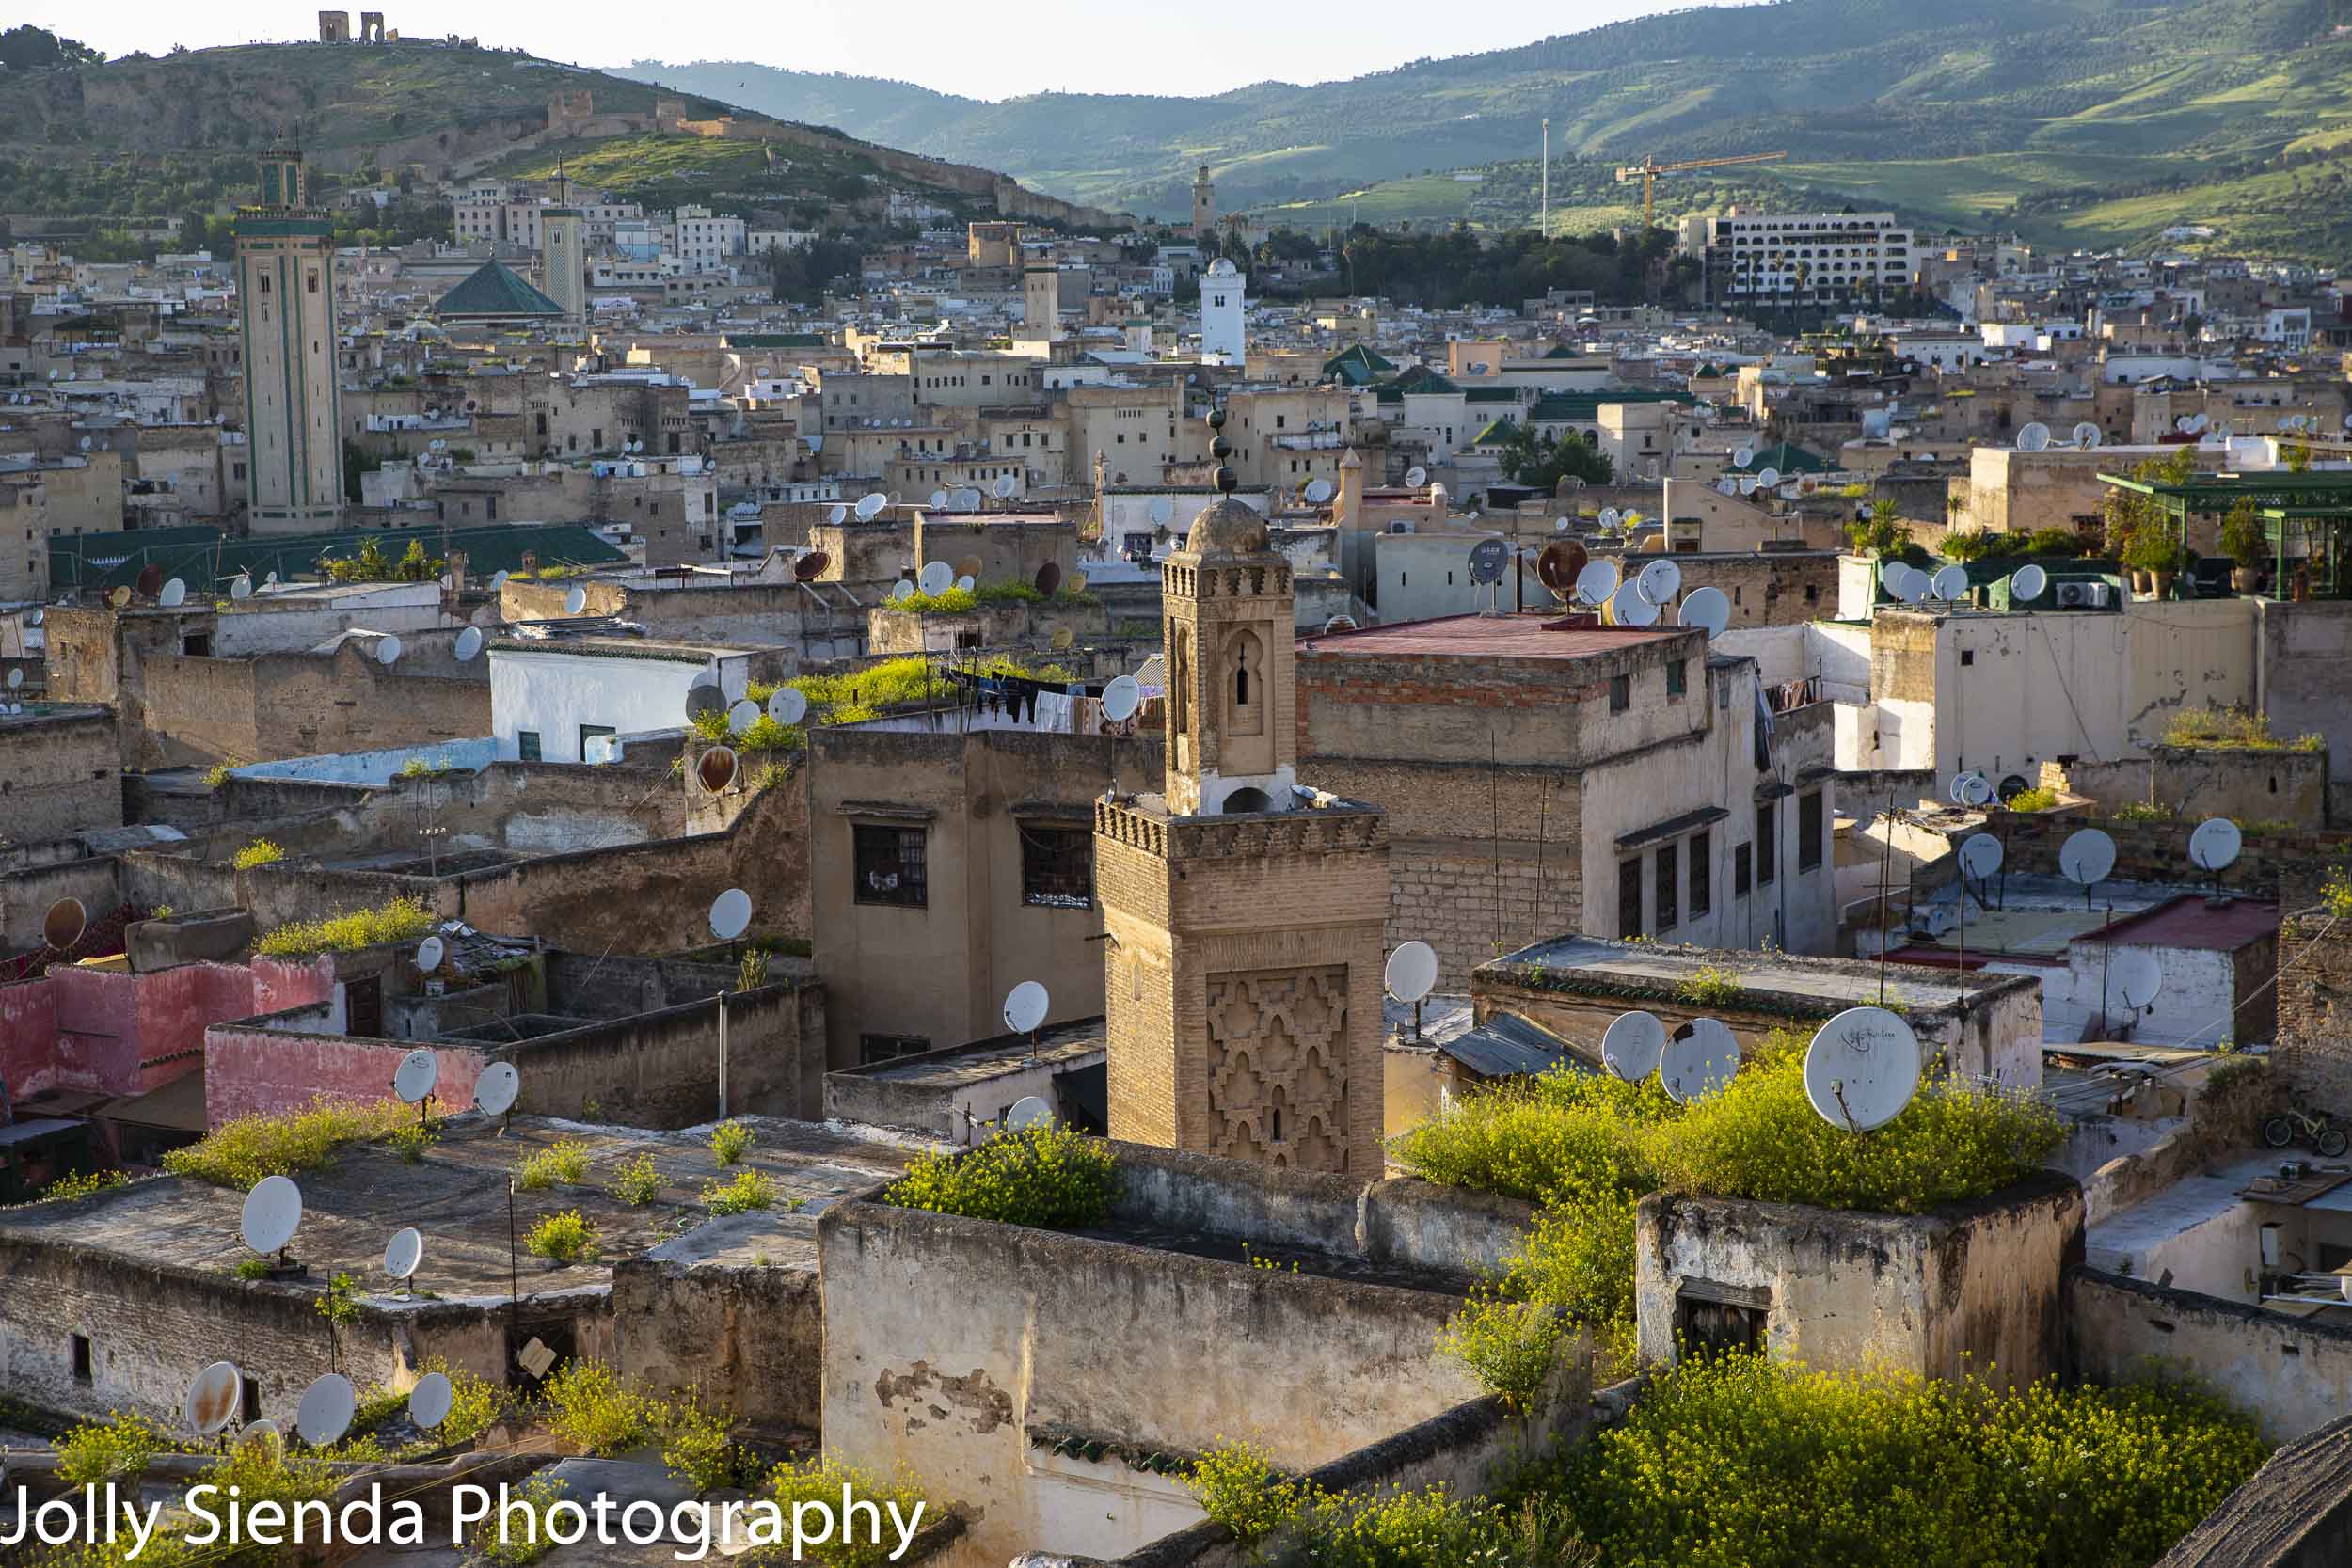 Ancient city of Fes, its mosques and tile roofs